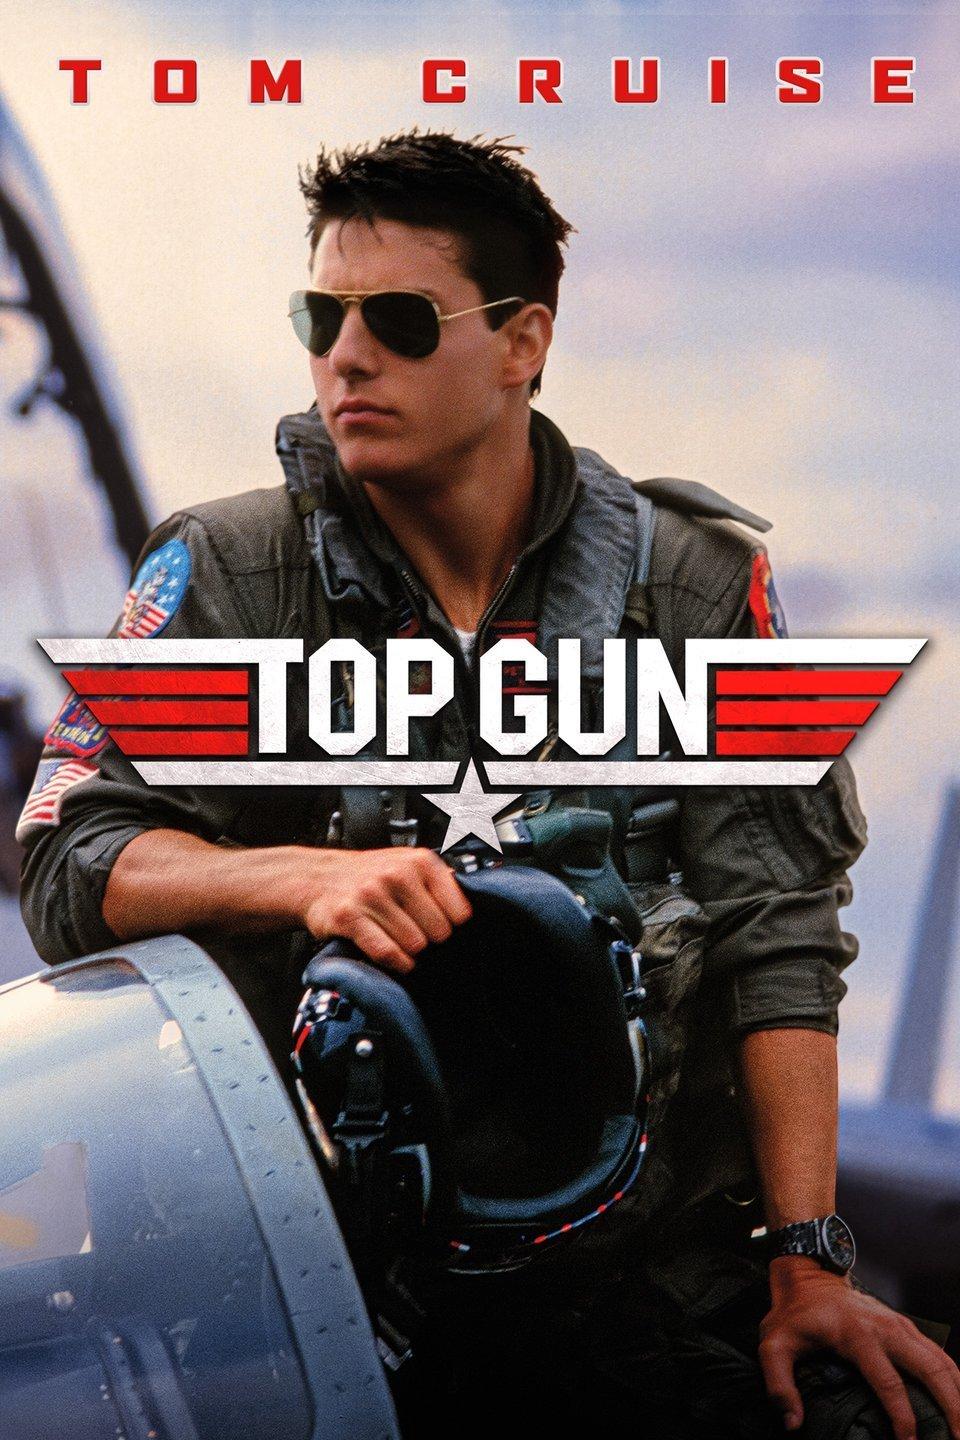 Movie poster for "Top Gun."